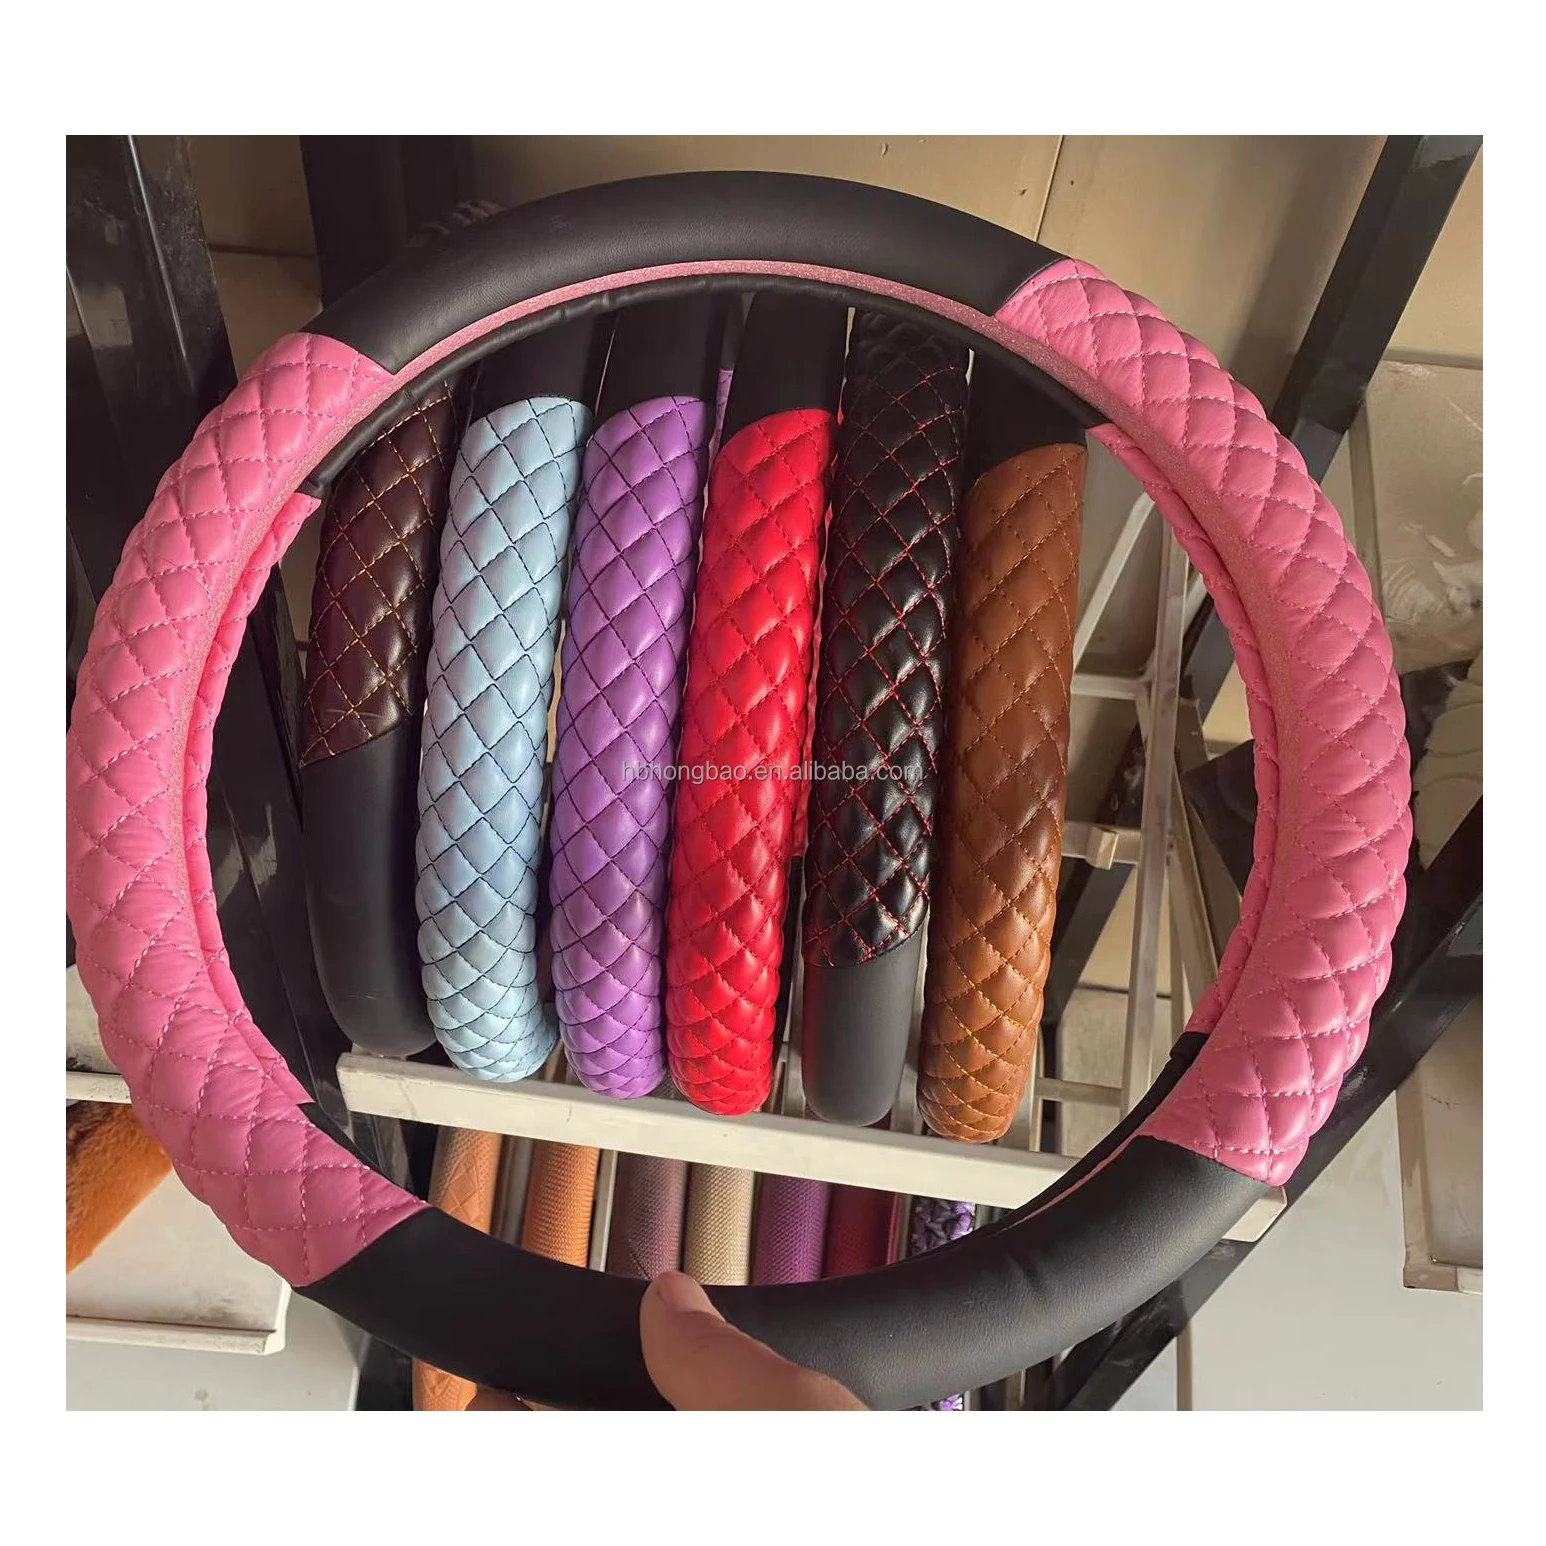 Custom Auto Hot Selling Car Steering Wheel Cover PU Leather Mesh Design Steering Wheel Covers Car Interior Decorations